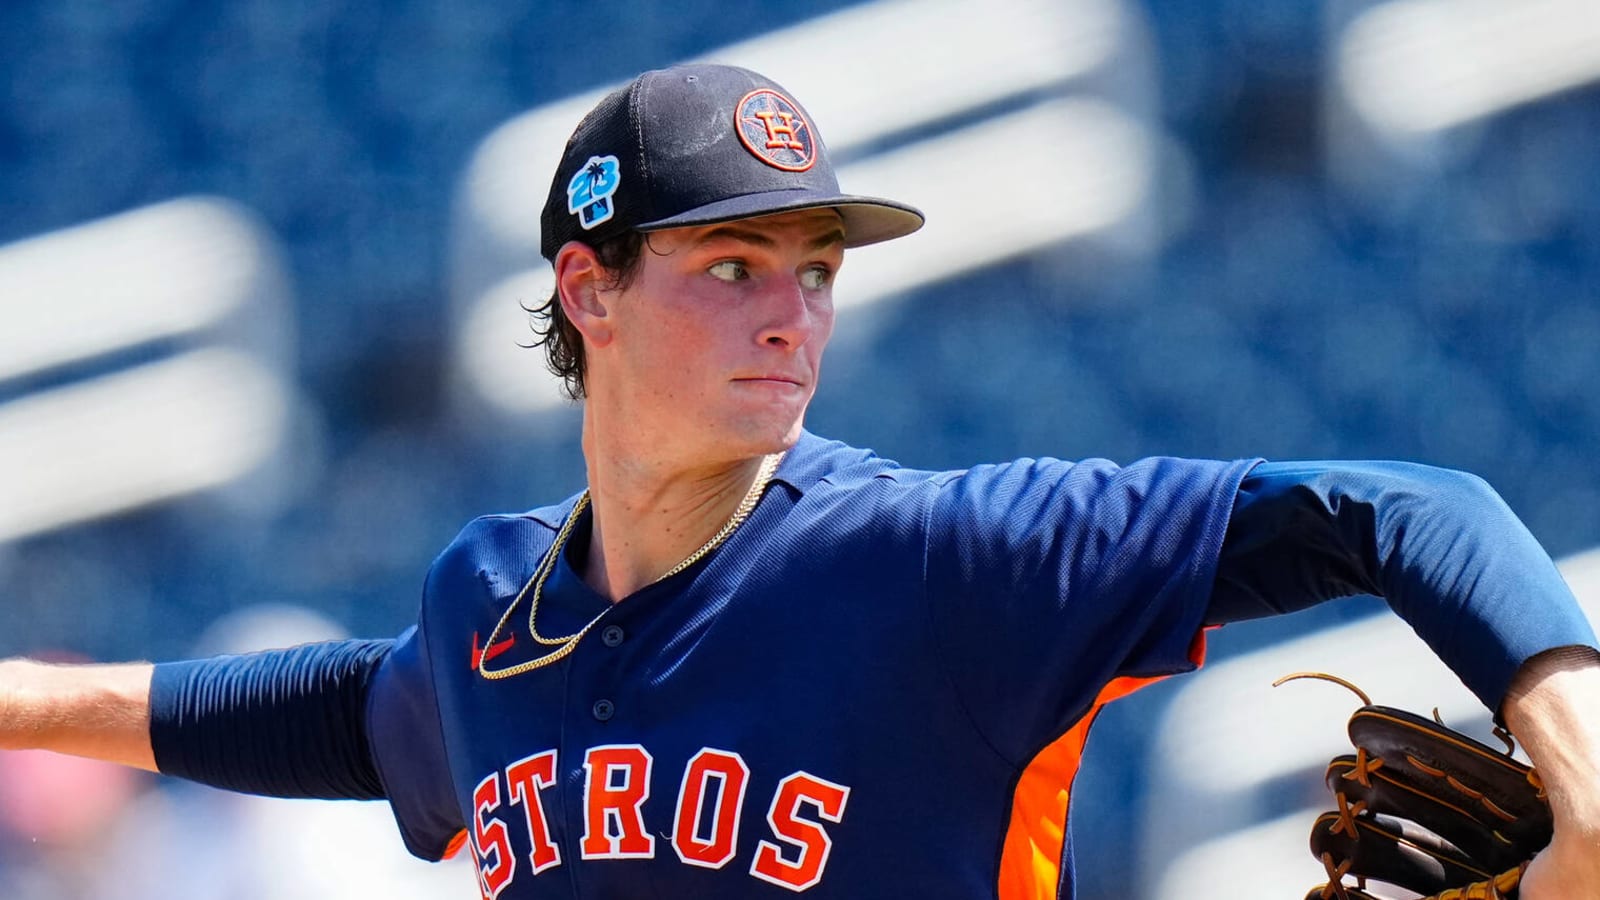 Astros promote former first-round pick who had long journey through minors